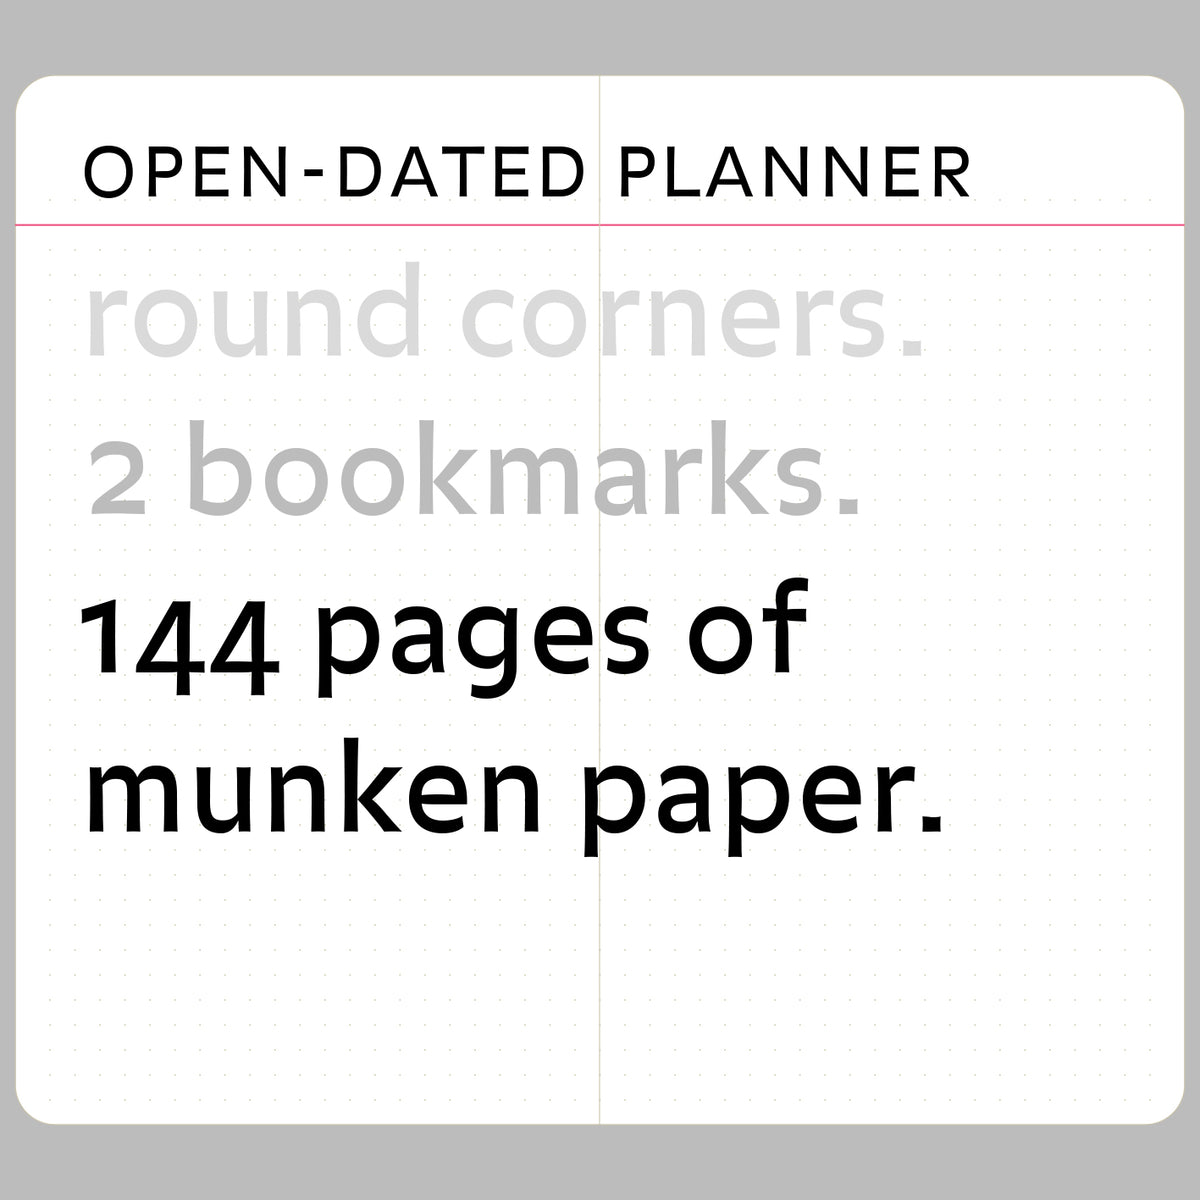 open-dated planner